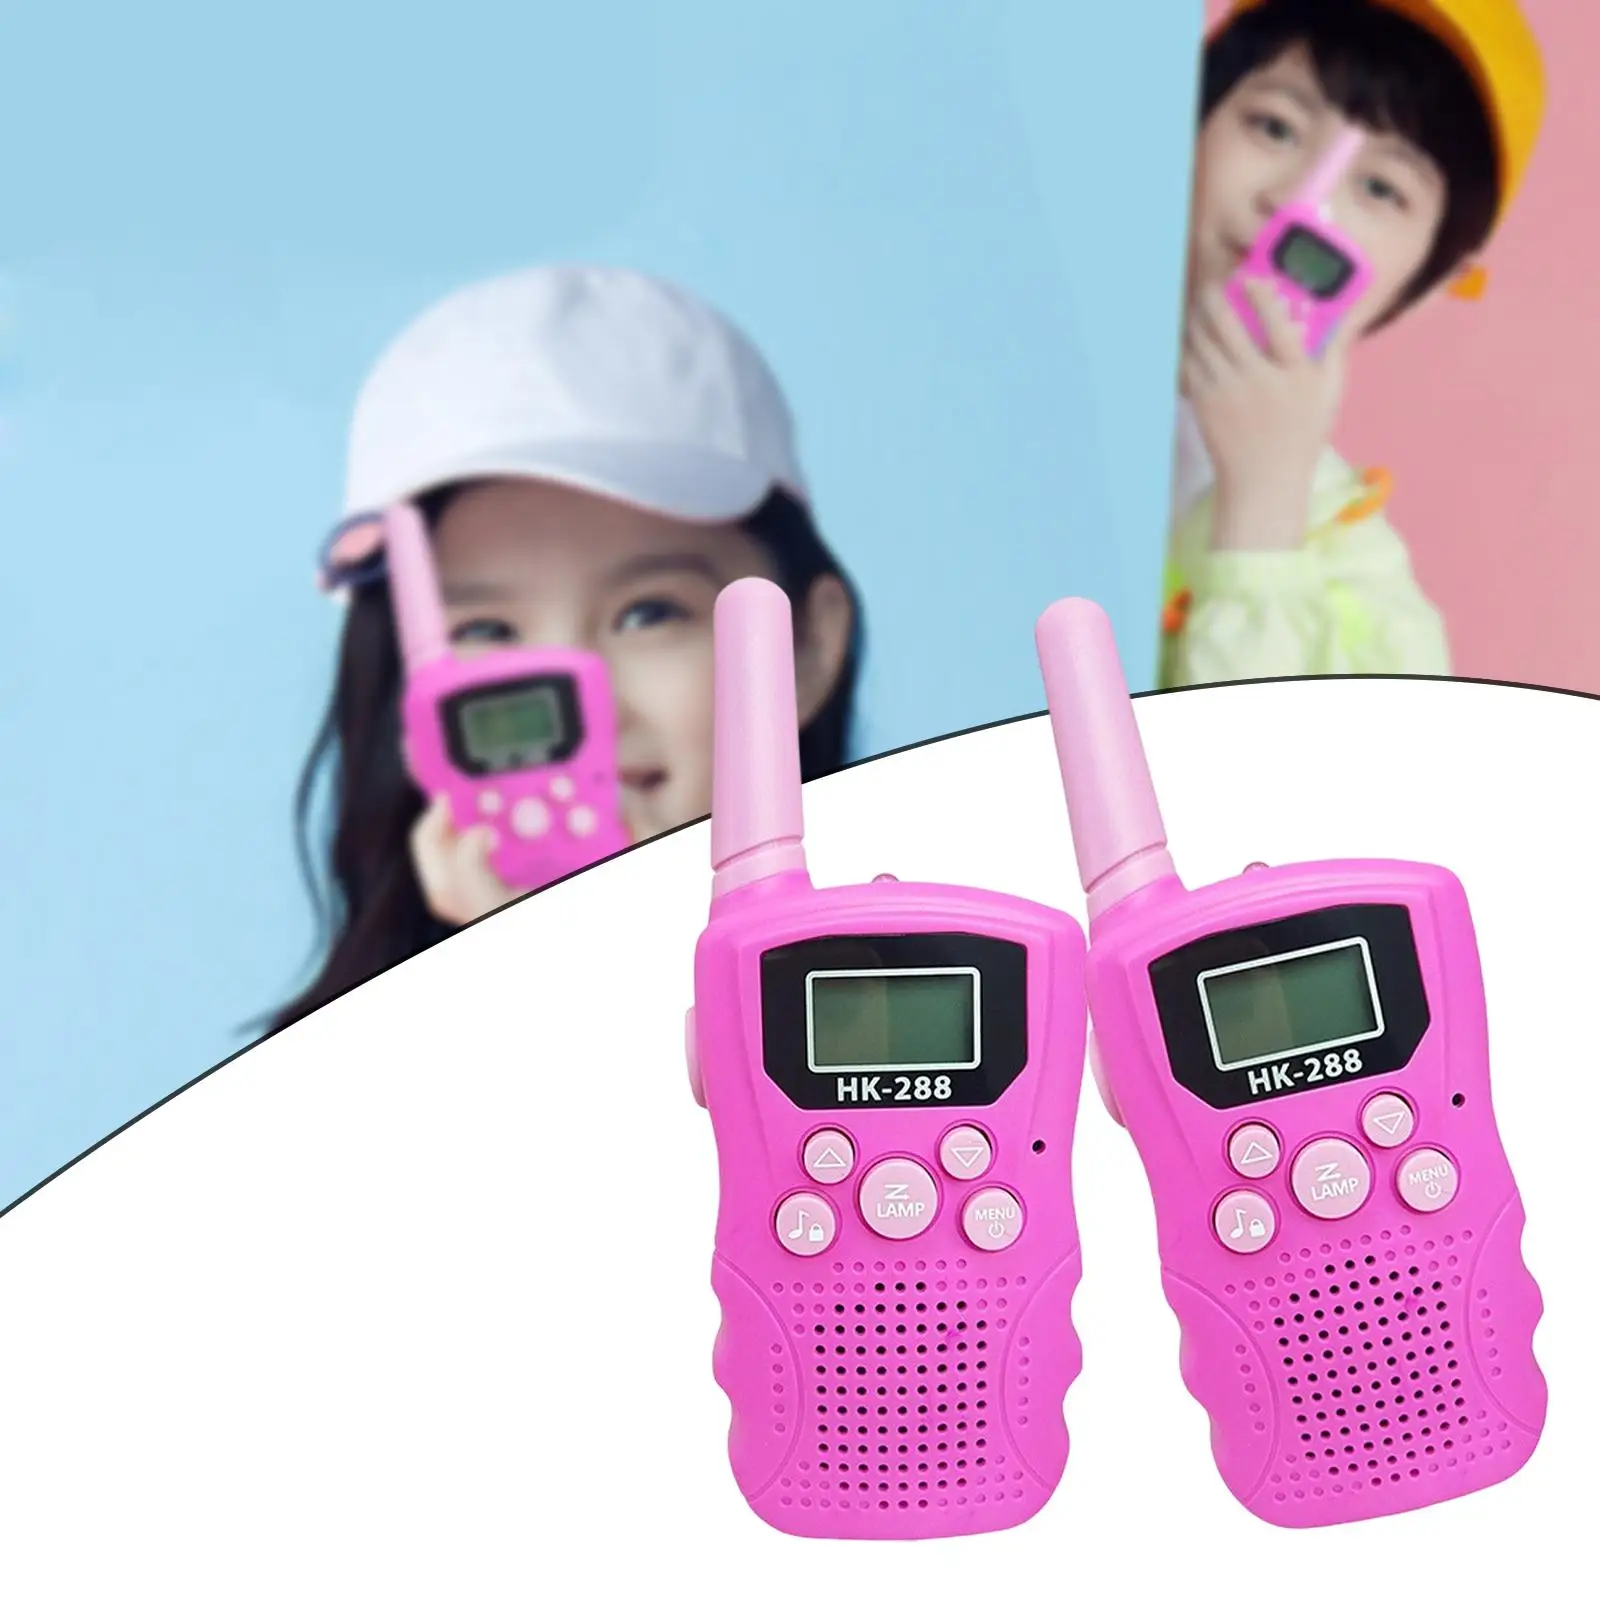 1Pair Walkie Talkie Children Walky Talky Toy for 3-12 Years Old Family Games